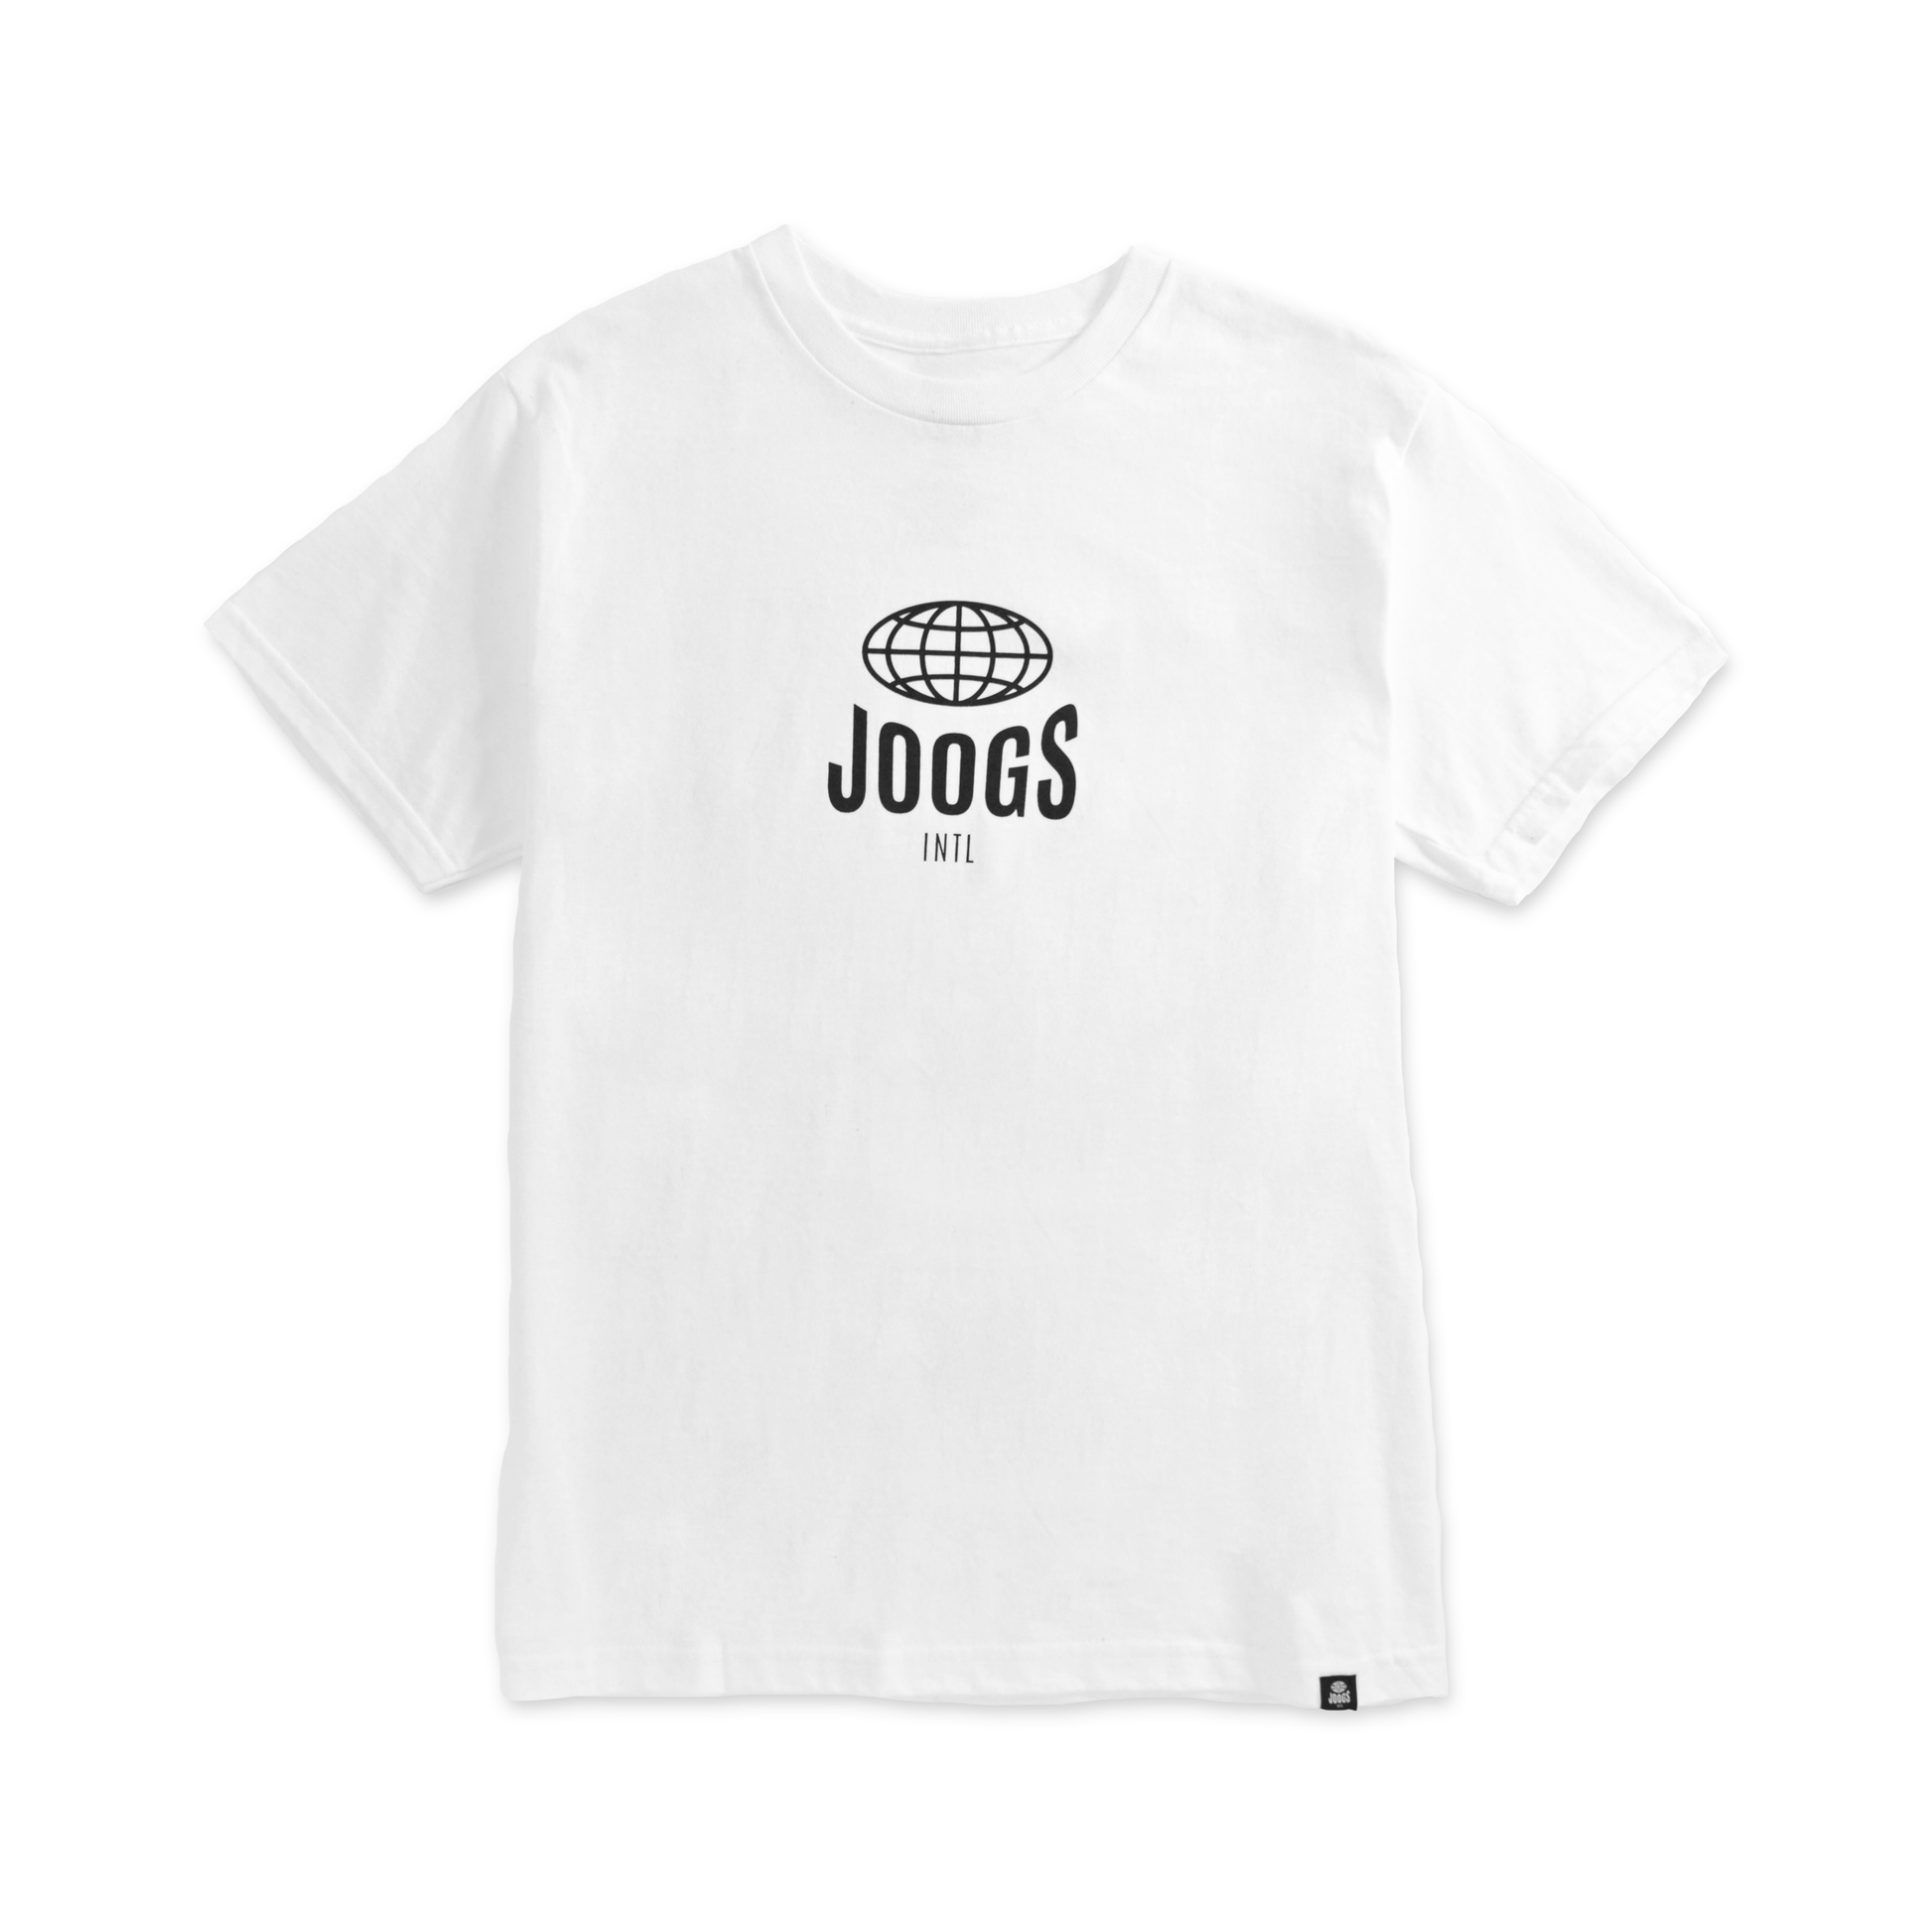 JOOGS LOGO TEE - WHITE - FRONT PRODUCT SHOT